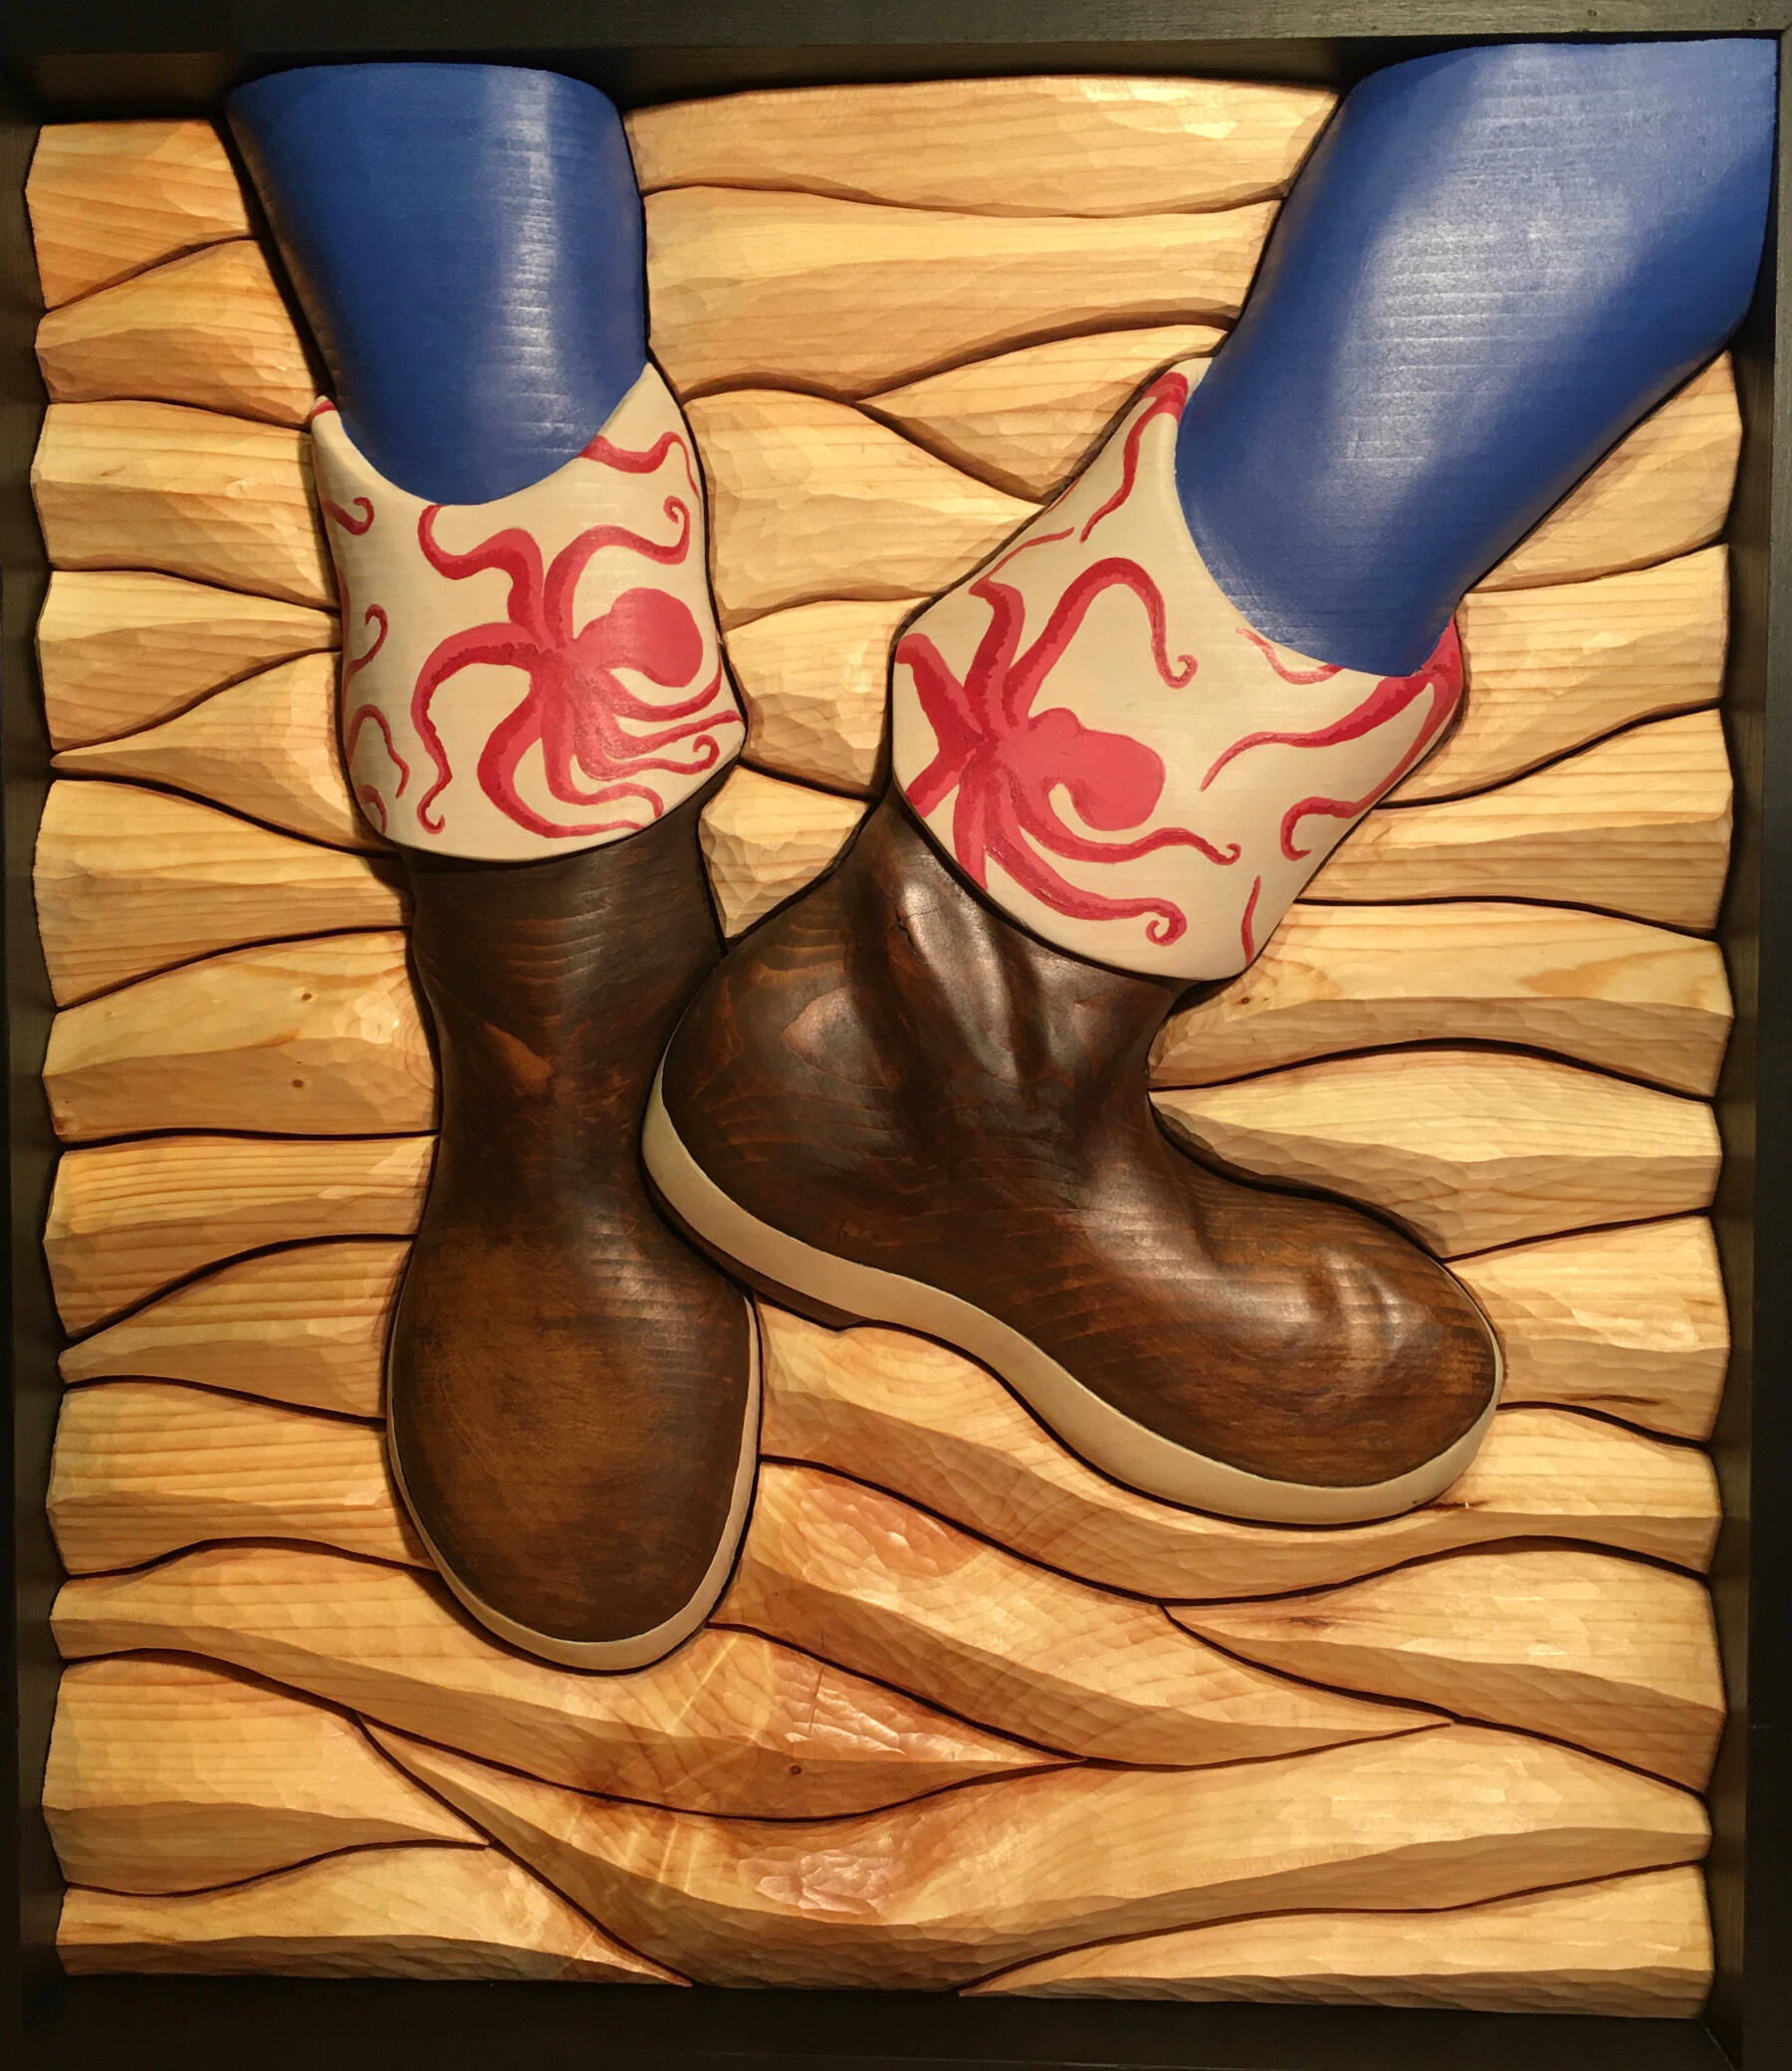 “A Little Attitude,” a commission piece by Deb Lowney was made from spruce wood and acrylic paint in 2020. Photo provided by Deb Lowney